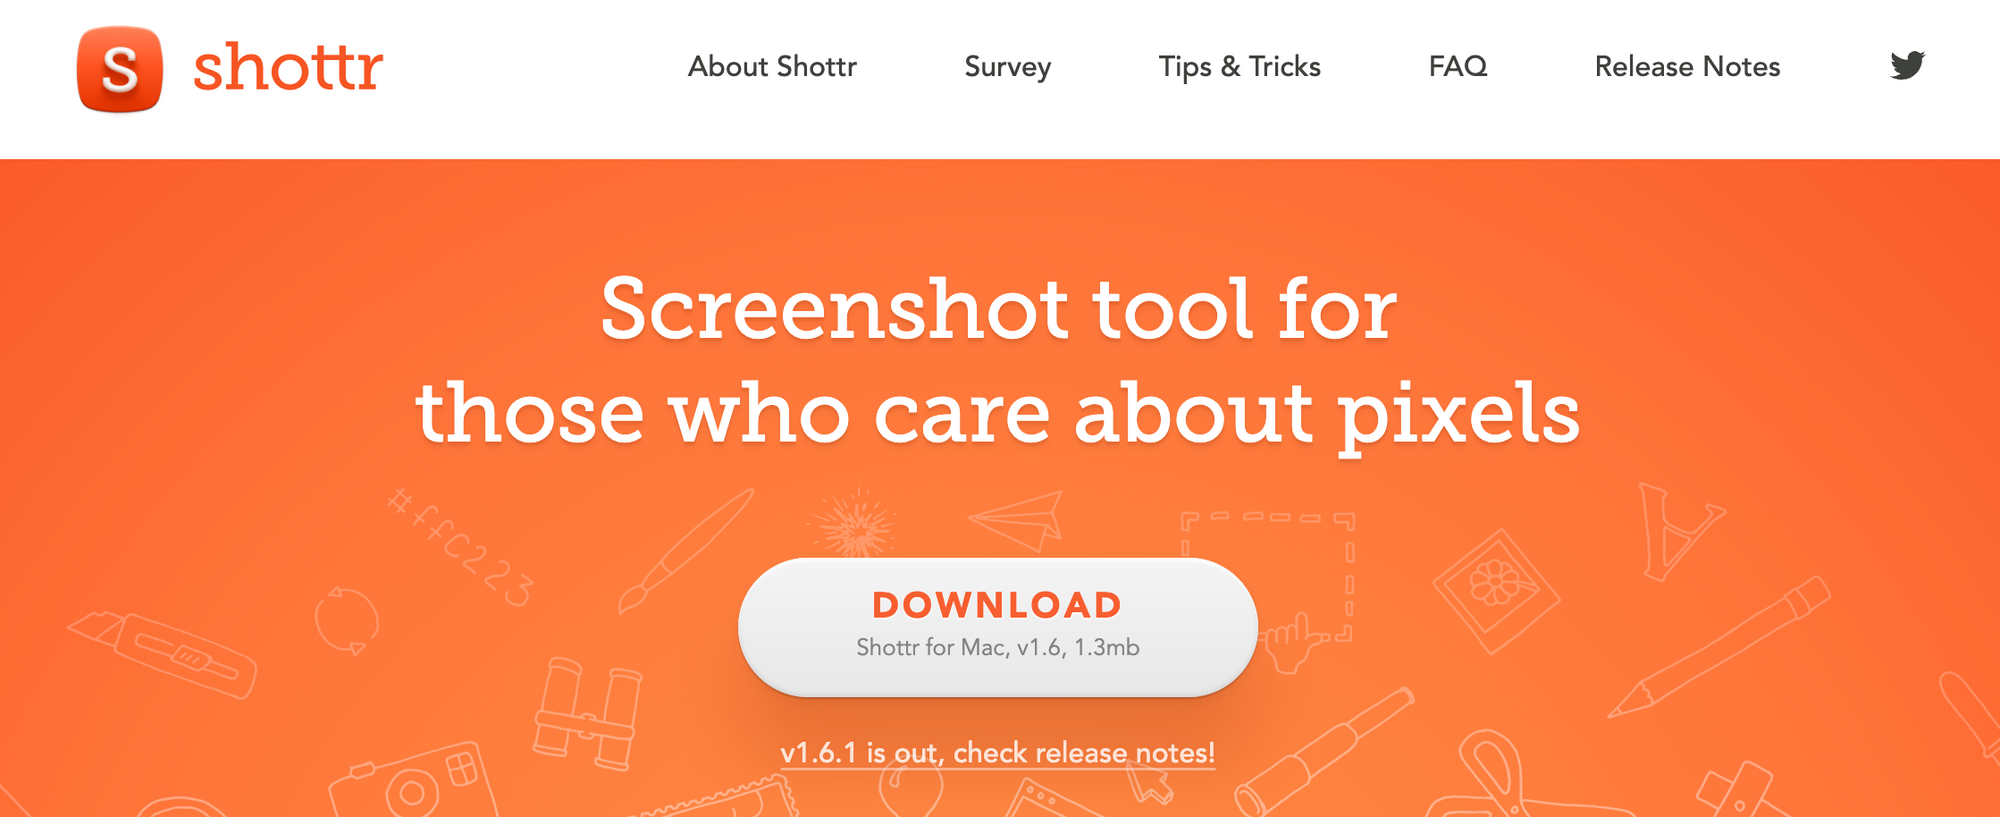 Product Review - Shottr for Mac - a screenshot tool for those who care about pixels ⭐️⭐️⭐️⭐️⭐️